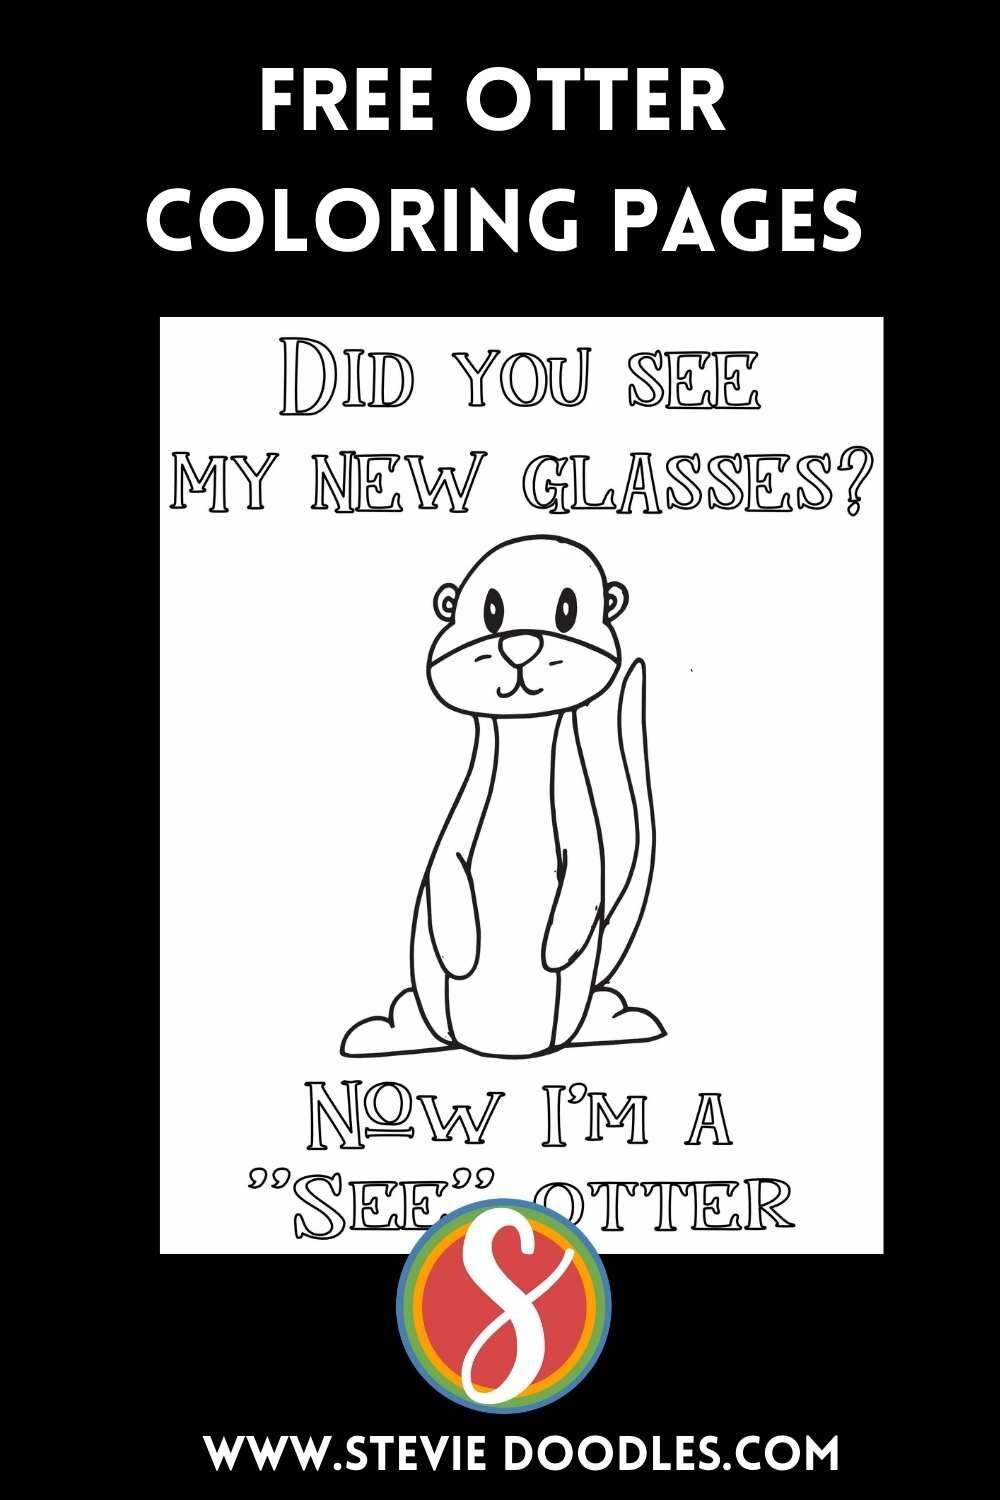 Free otter pun coloring page from Stevie Doodles